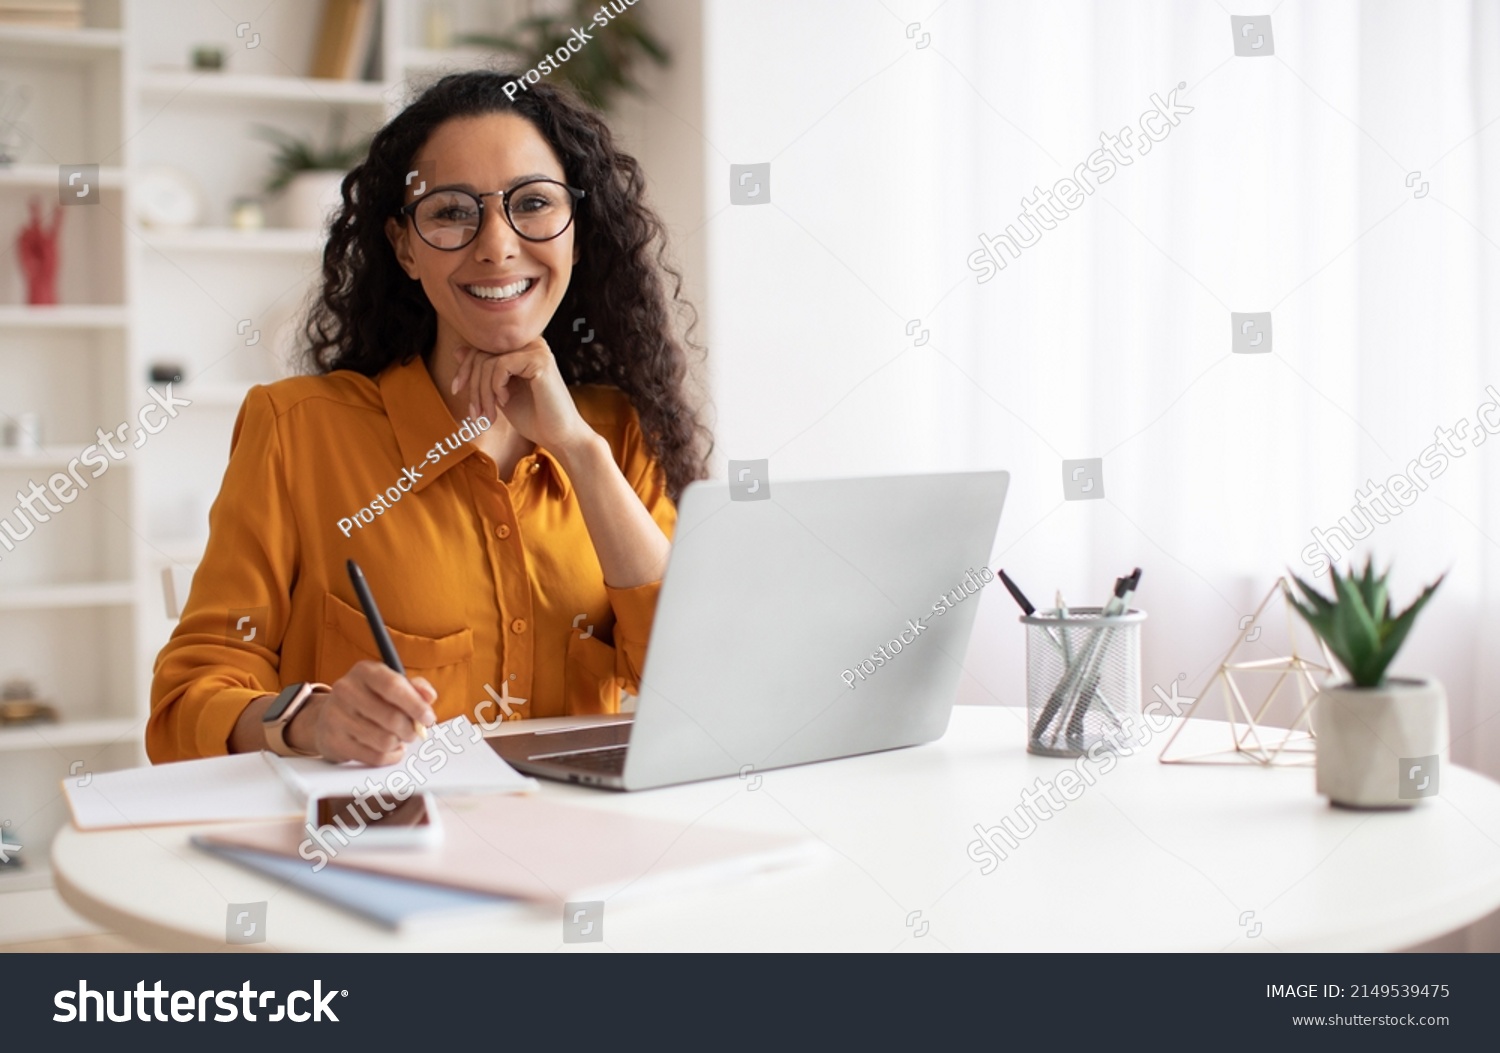 Happy Brunette Business Lady Using Laptop Smiling To Camera Posing Wearing Glasses Working Sitting At Workplace In Modern Office. Successful Entrepreneurship And Career Concept #2149539475